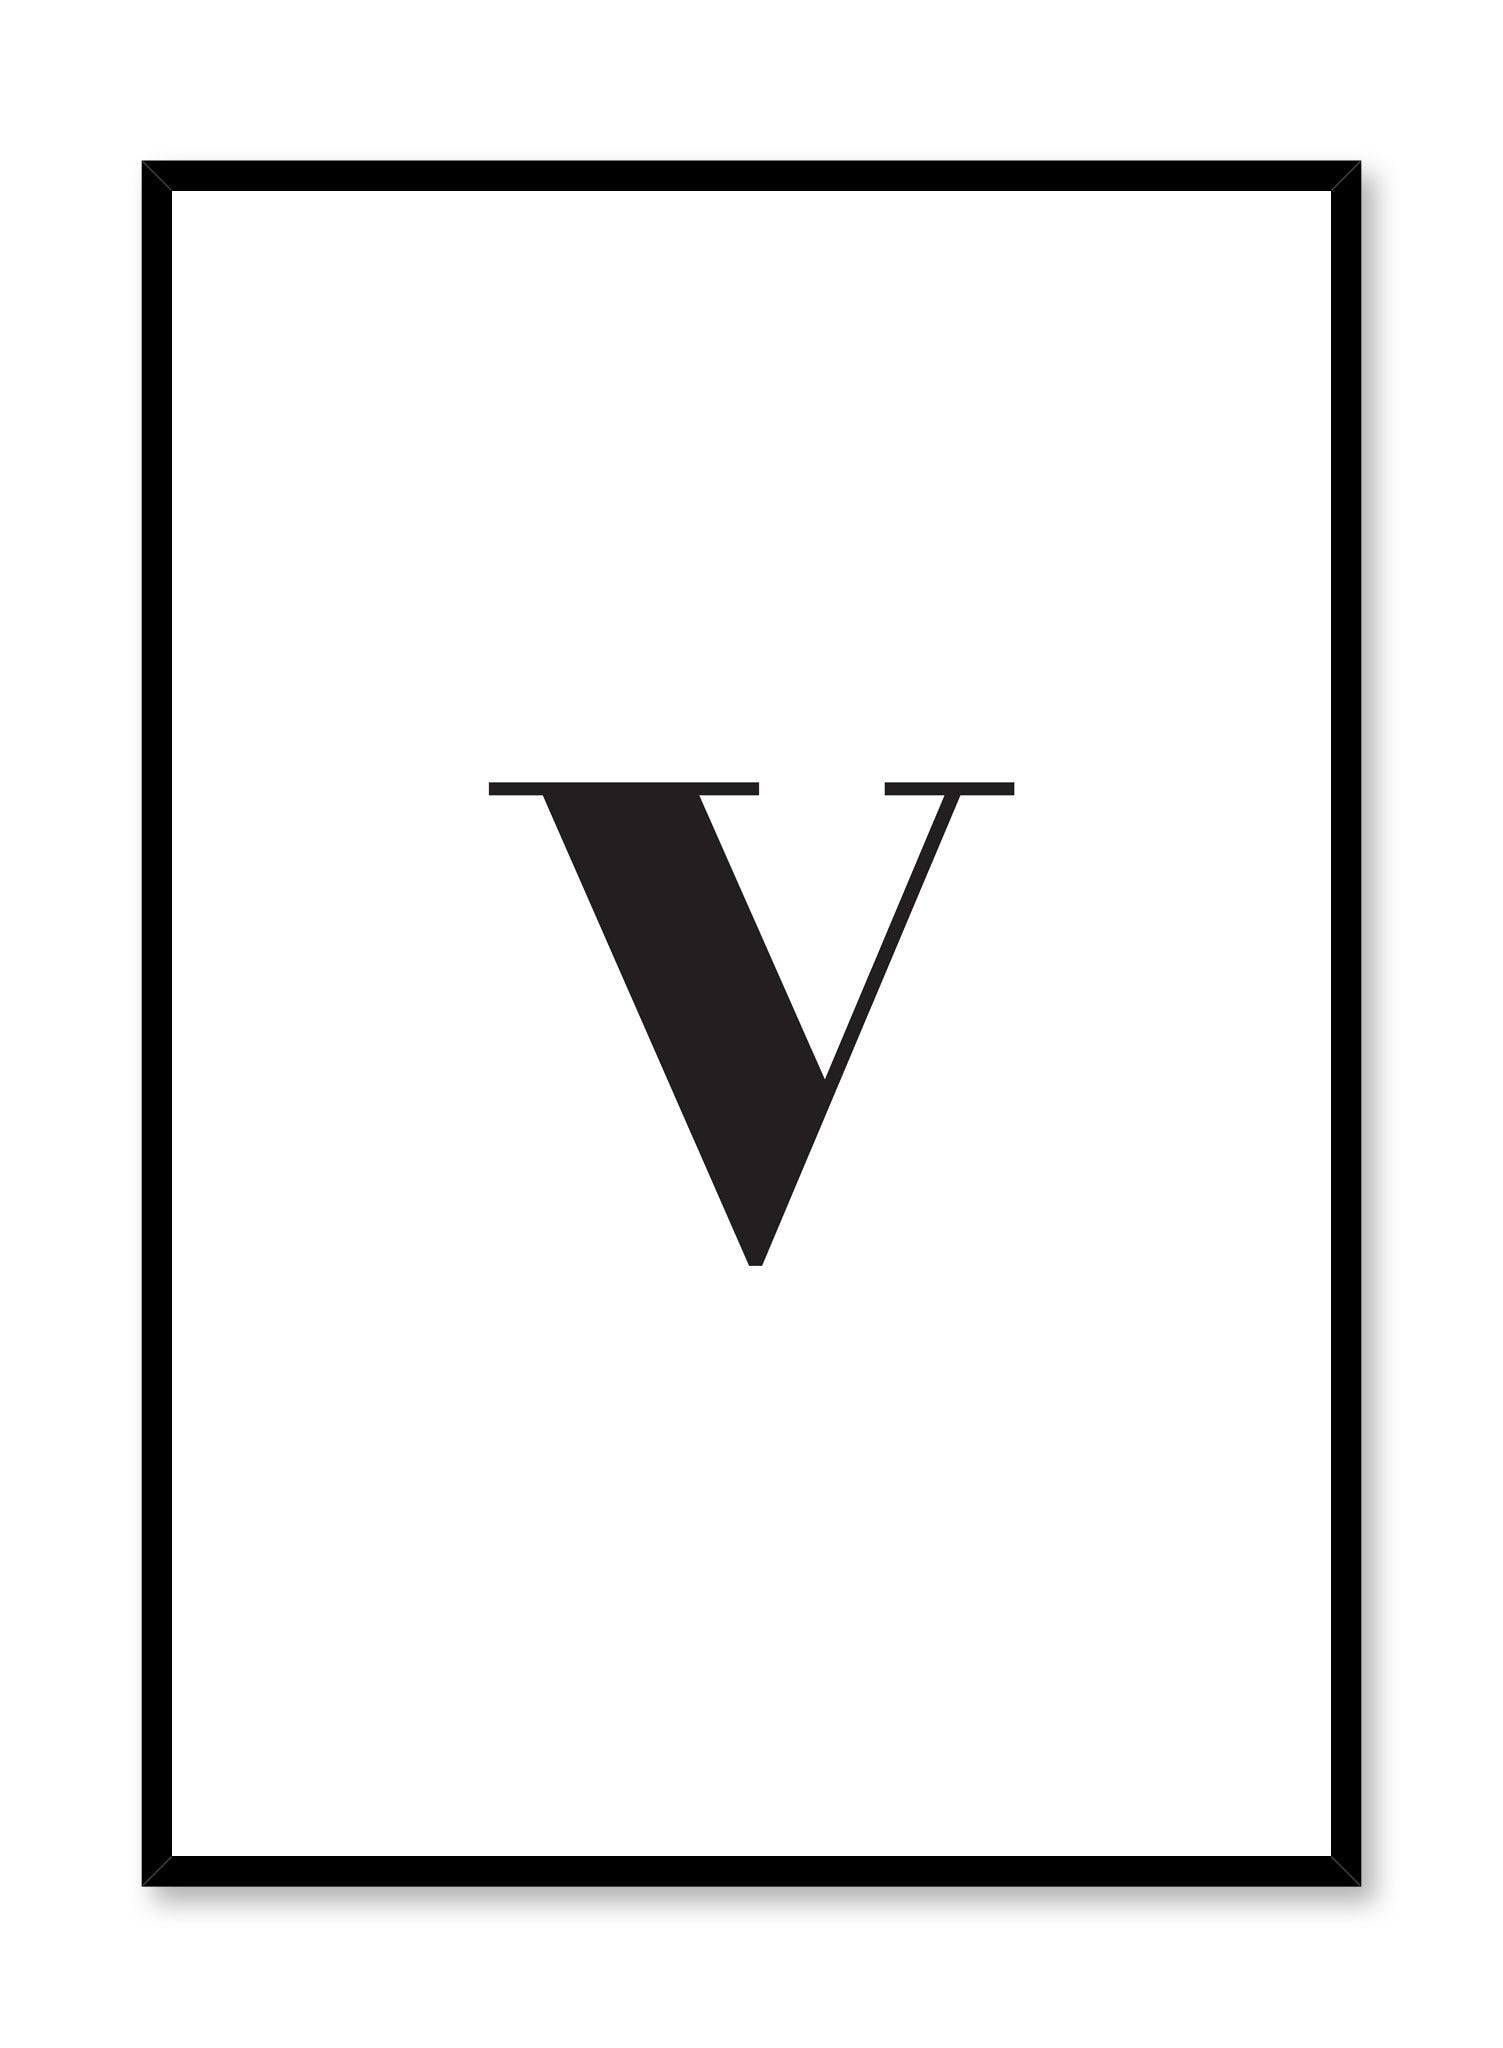 Scandinavian poster with black and white graphic typography design of lowercase letter V by Opposite Wall